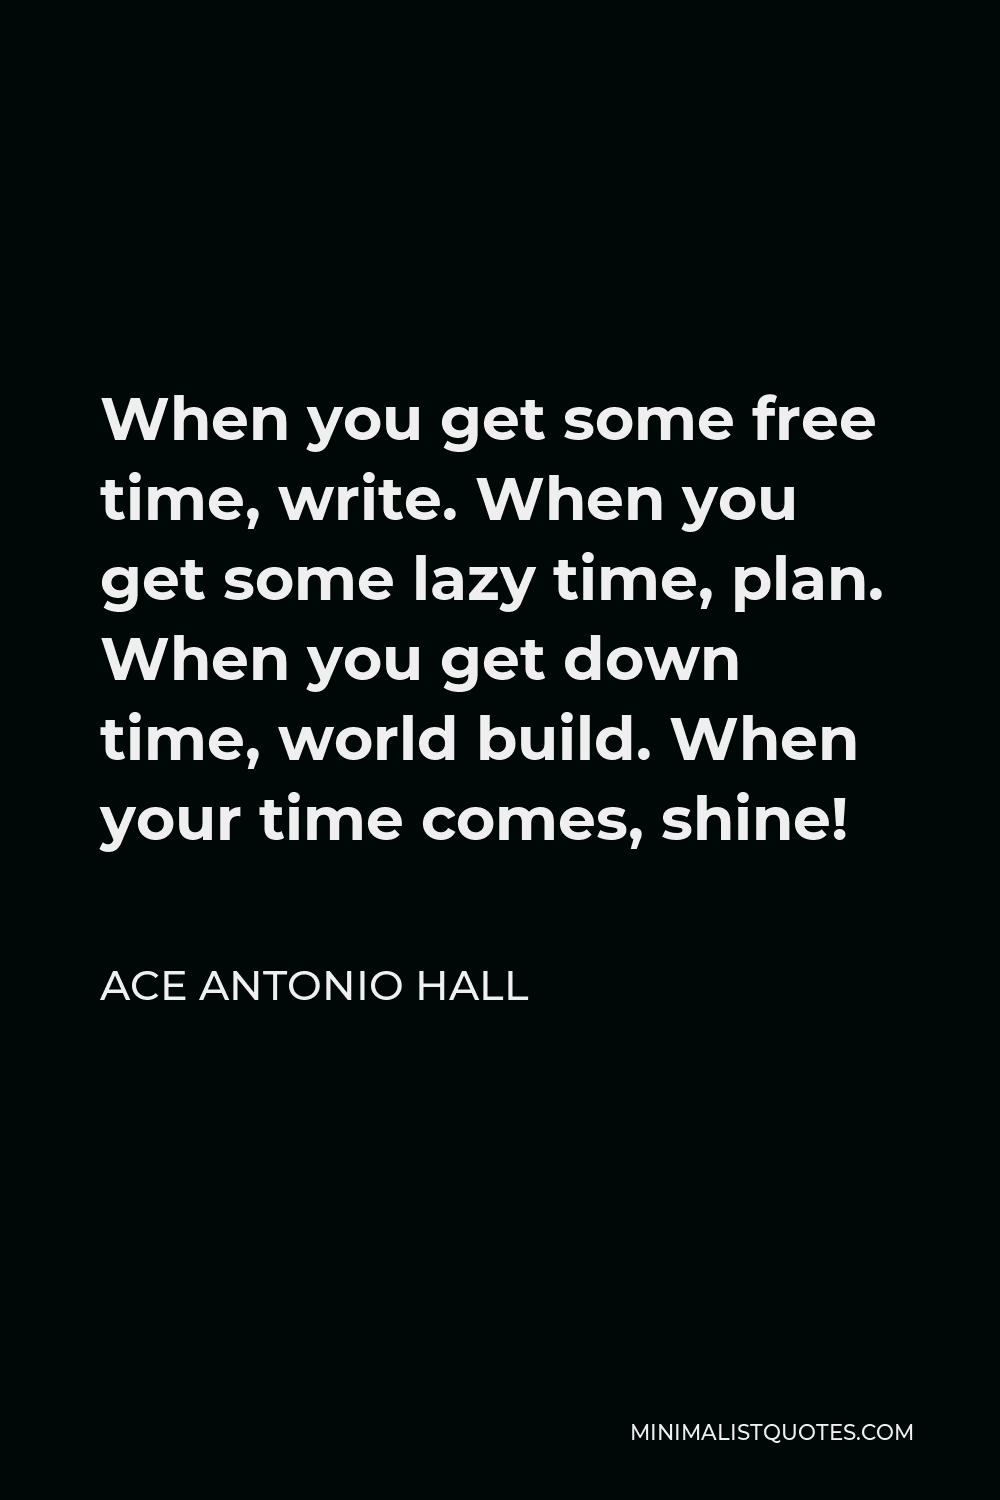 Ace Antonio Hall Quote - When you get some free time, write. When you get some lazy time, plan. When you get down time, world build. When your time comes, shine!